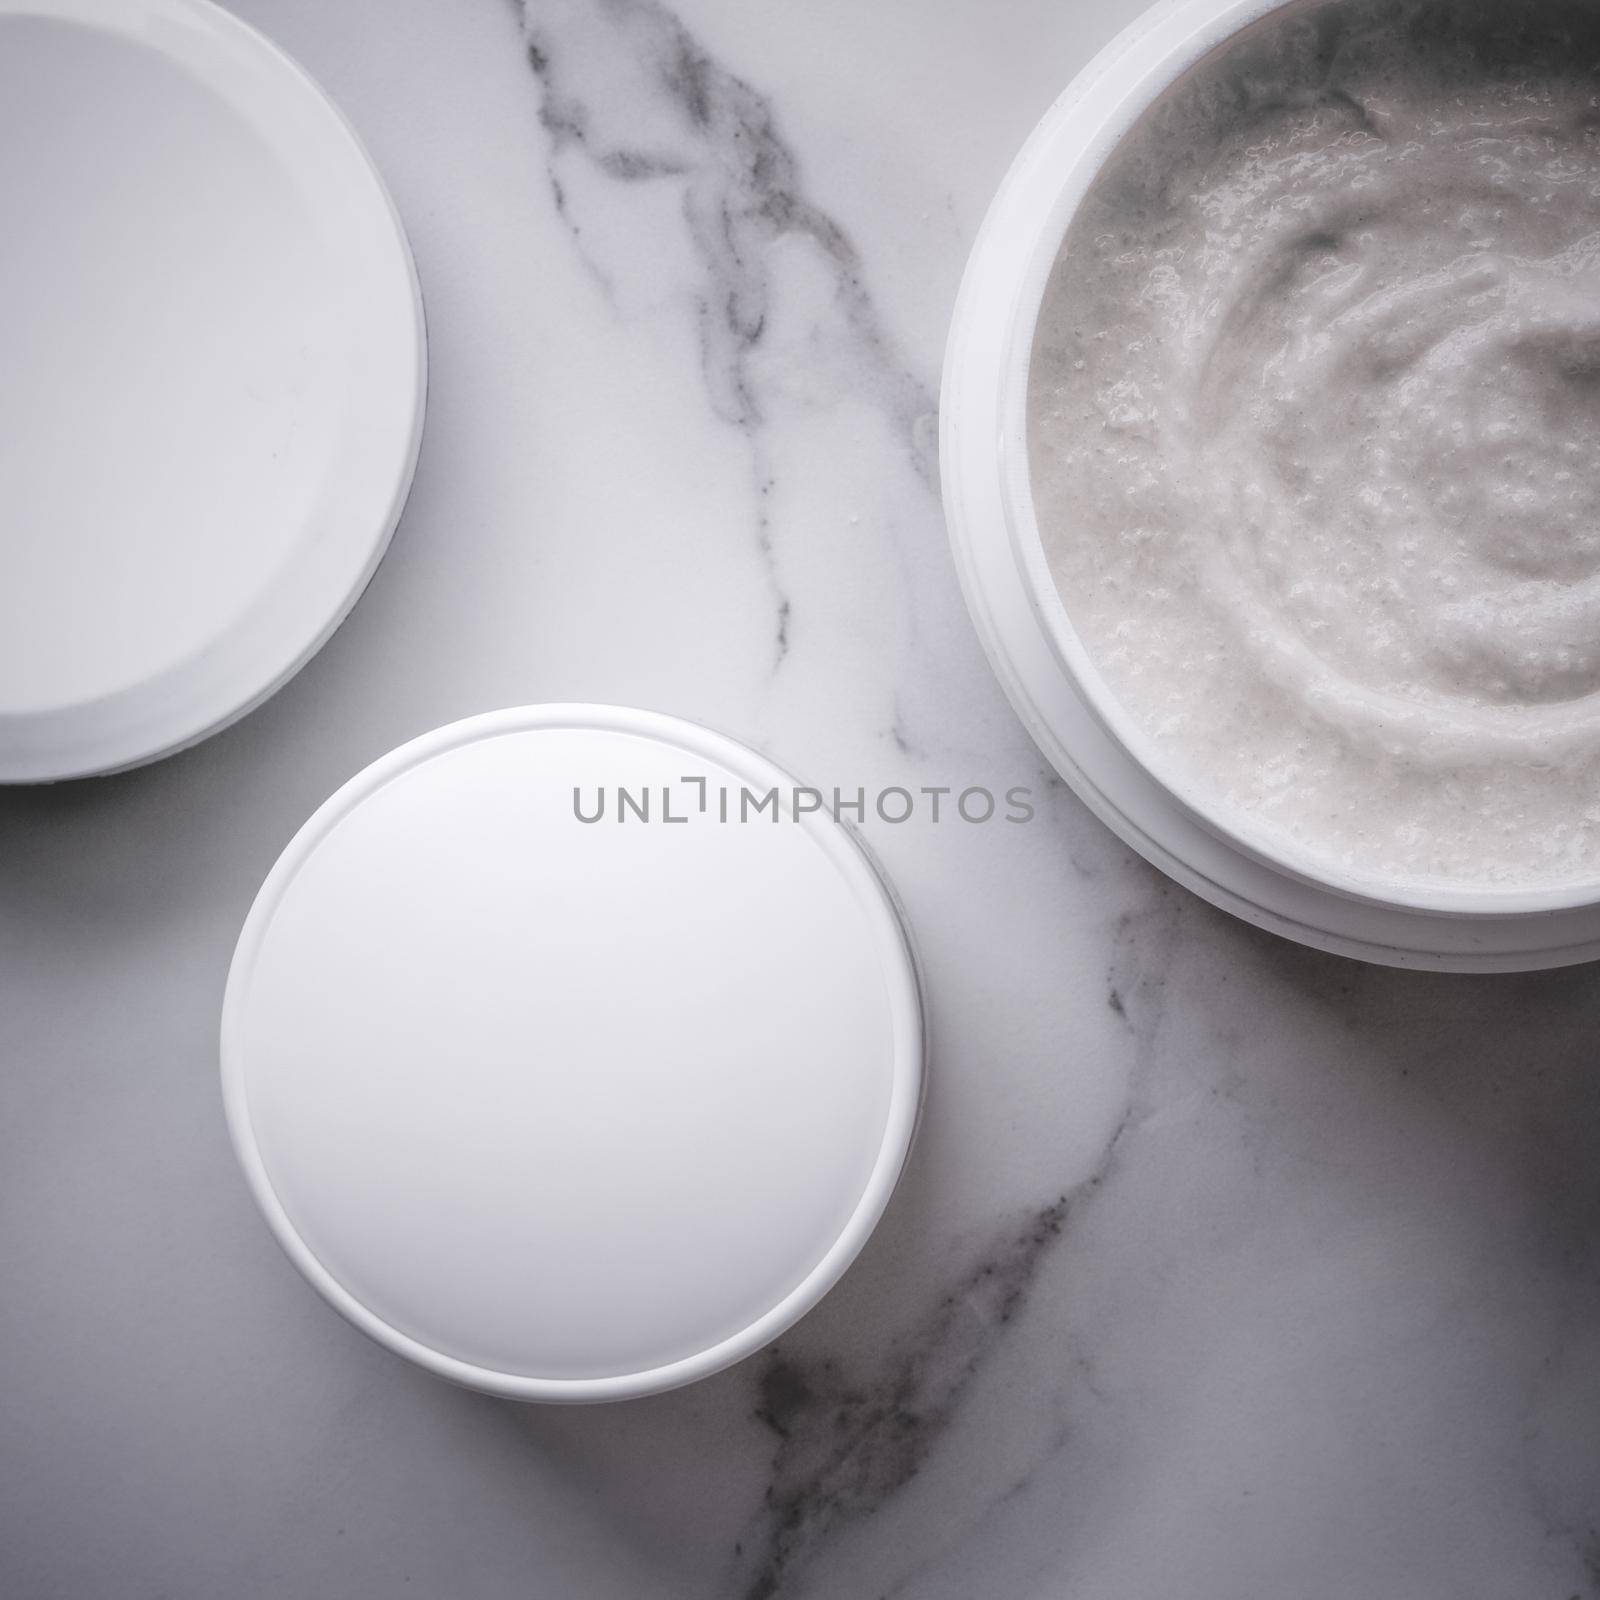 Skincare and body care, luxury spa and clean cosmetic concept. Health and beauty of your skin - Scrub and exfoliating cream products on a marble, flatlay